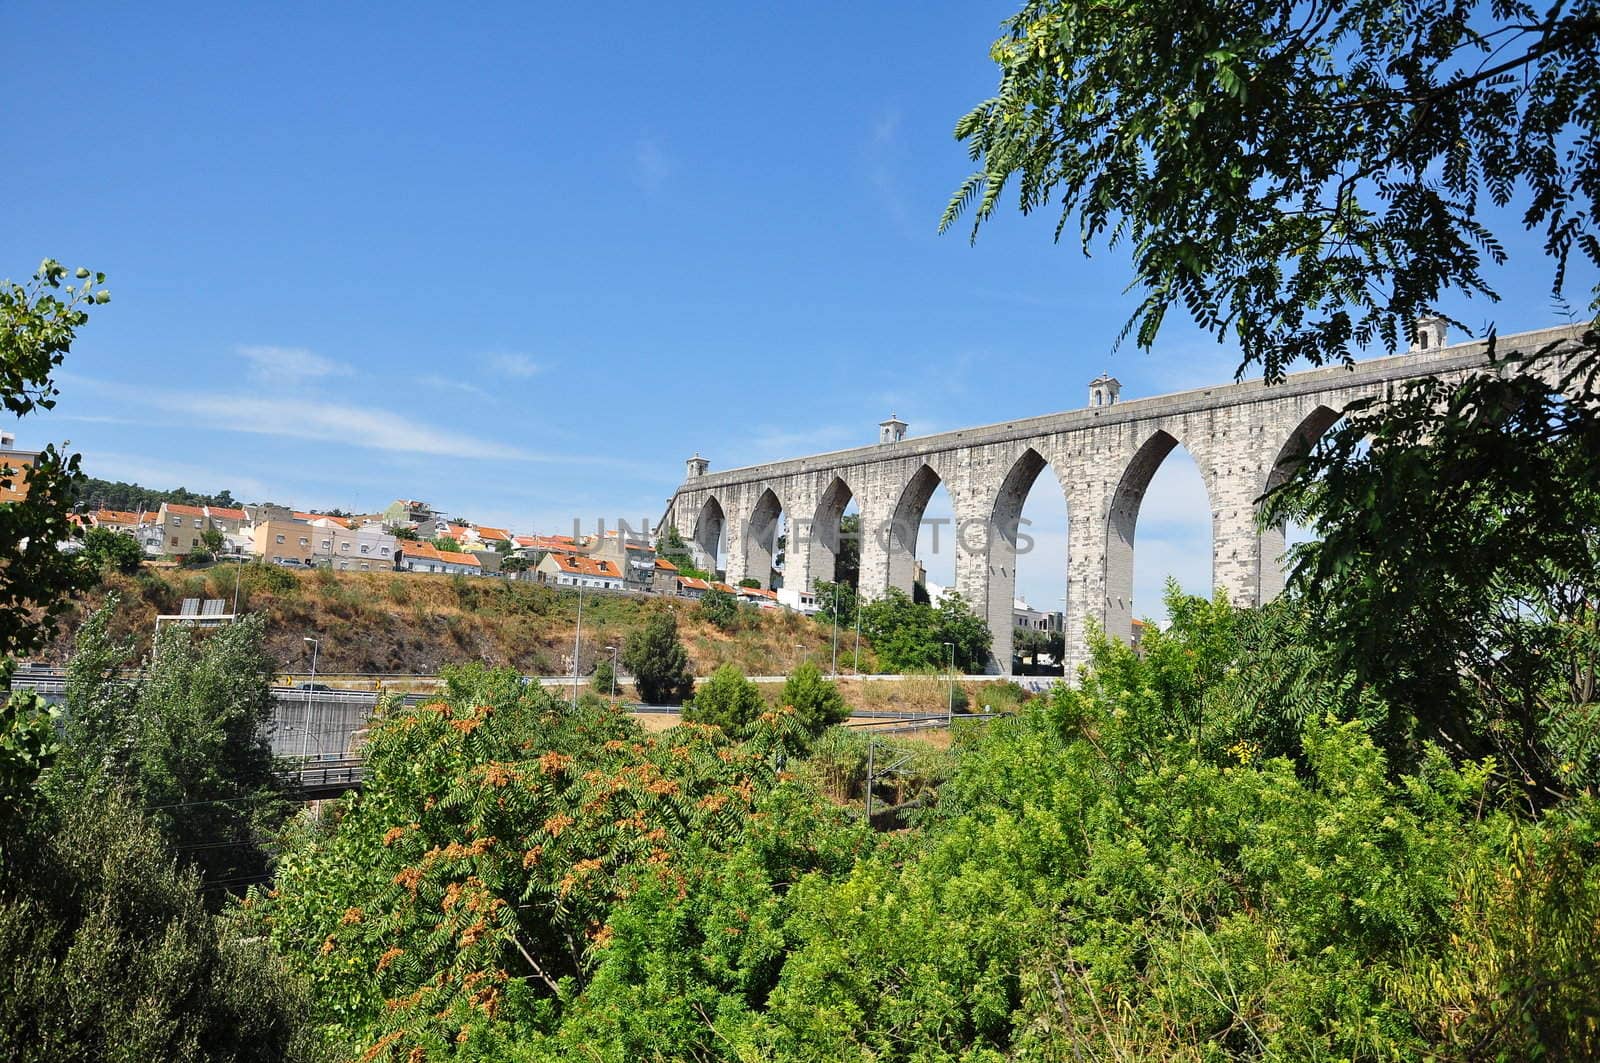 Historical water in the city of Lisbon built in the 18 th century, Portugal